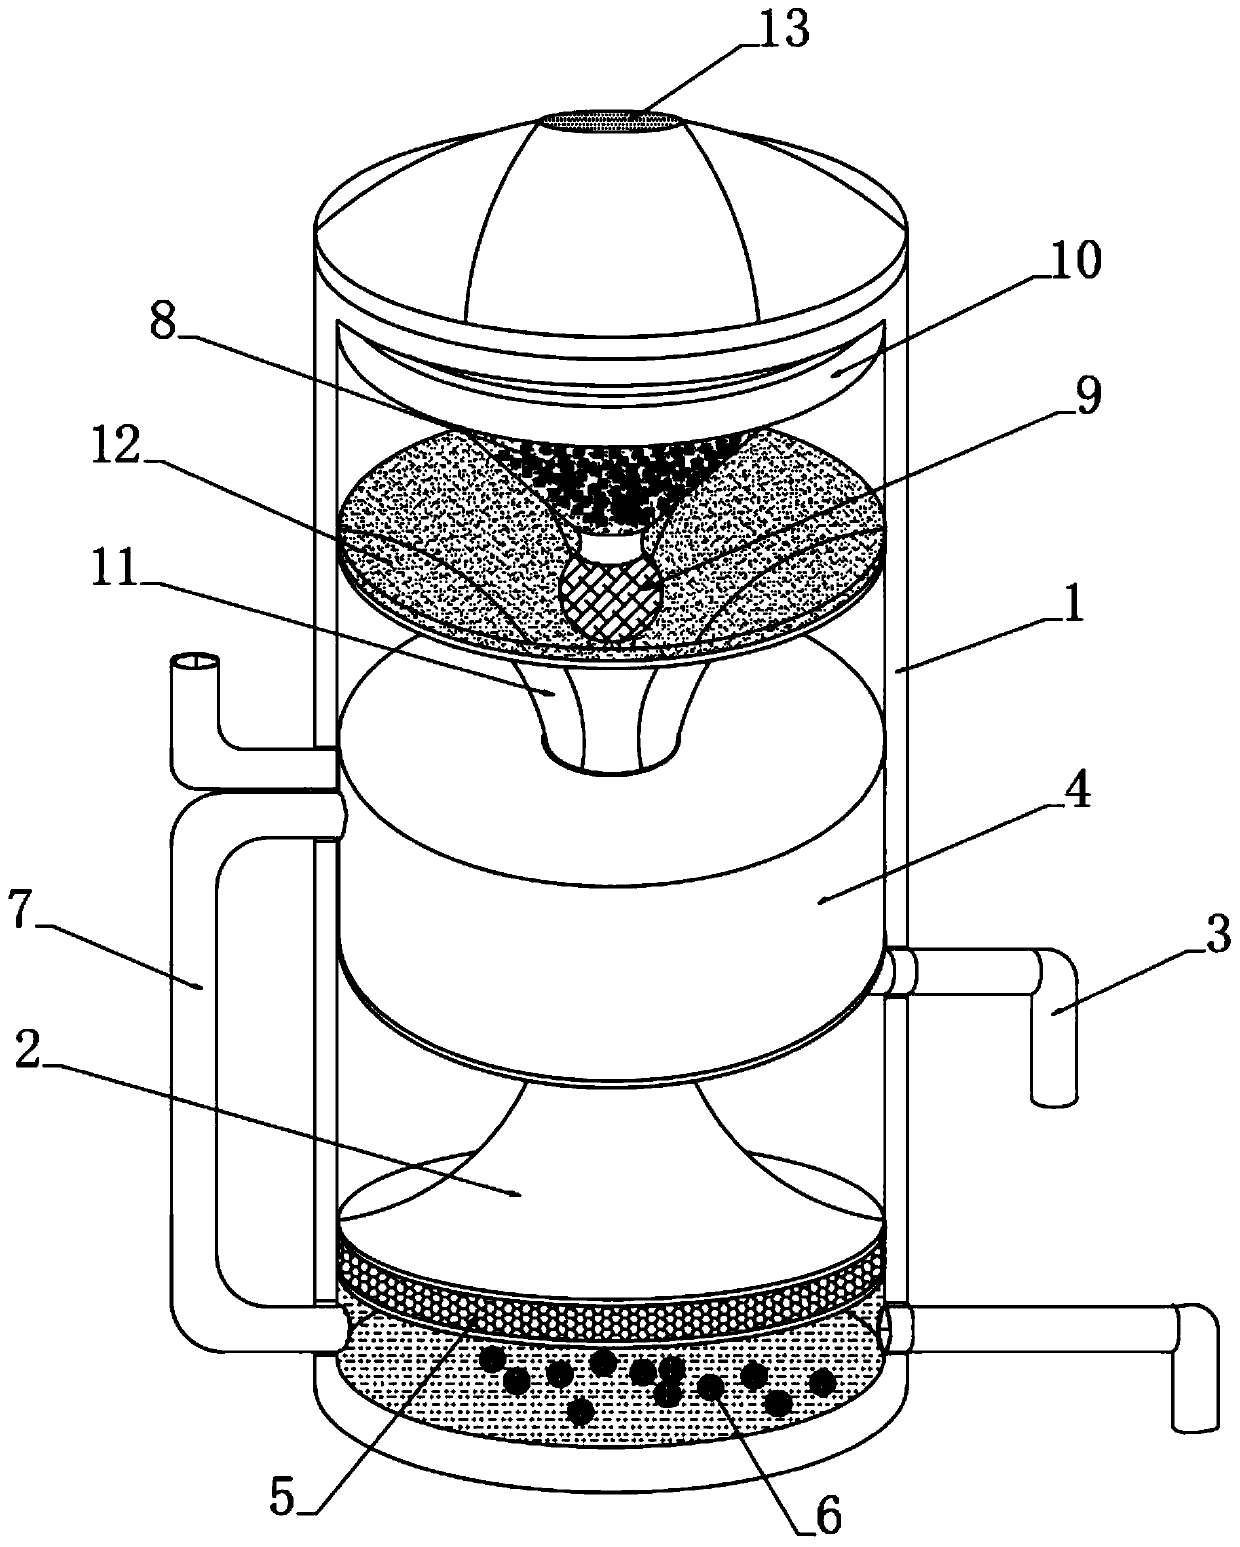 Adsorption purification device for industrial oil-containing waste gas treatment